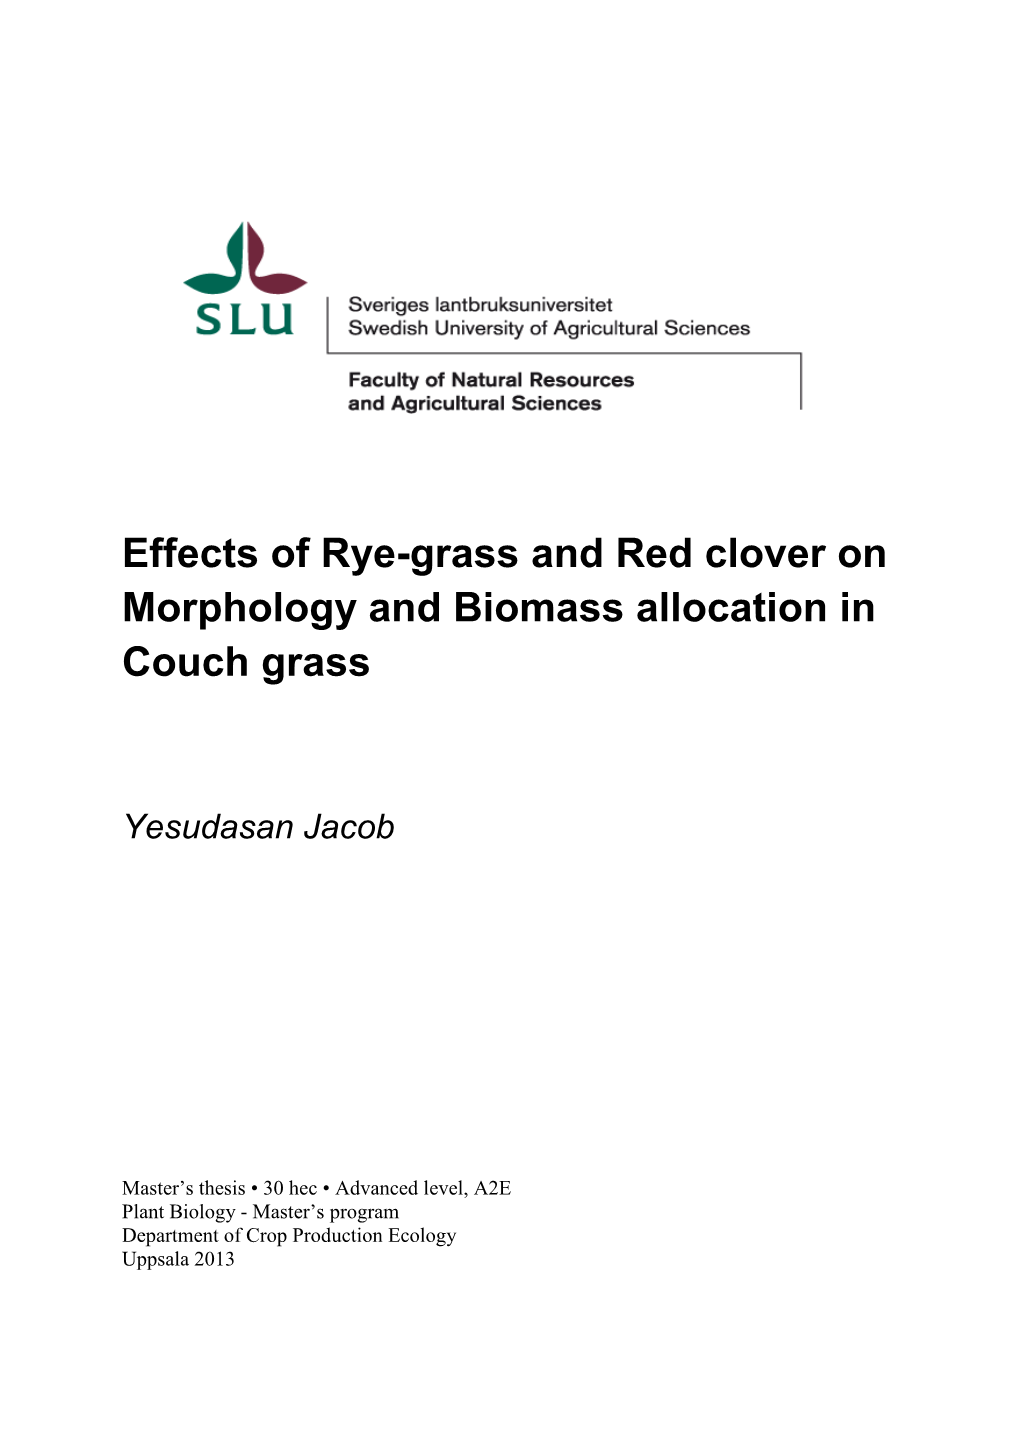 Effects of Rye-Grass and Red Clover on Morphology and Biomass Allocation in Couch Grass